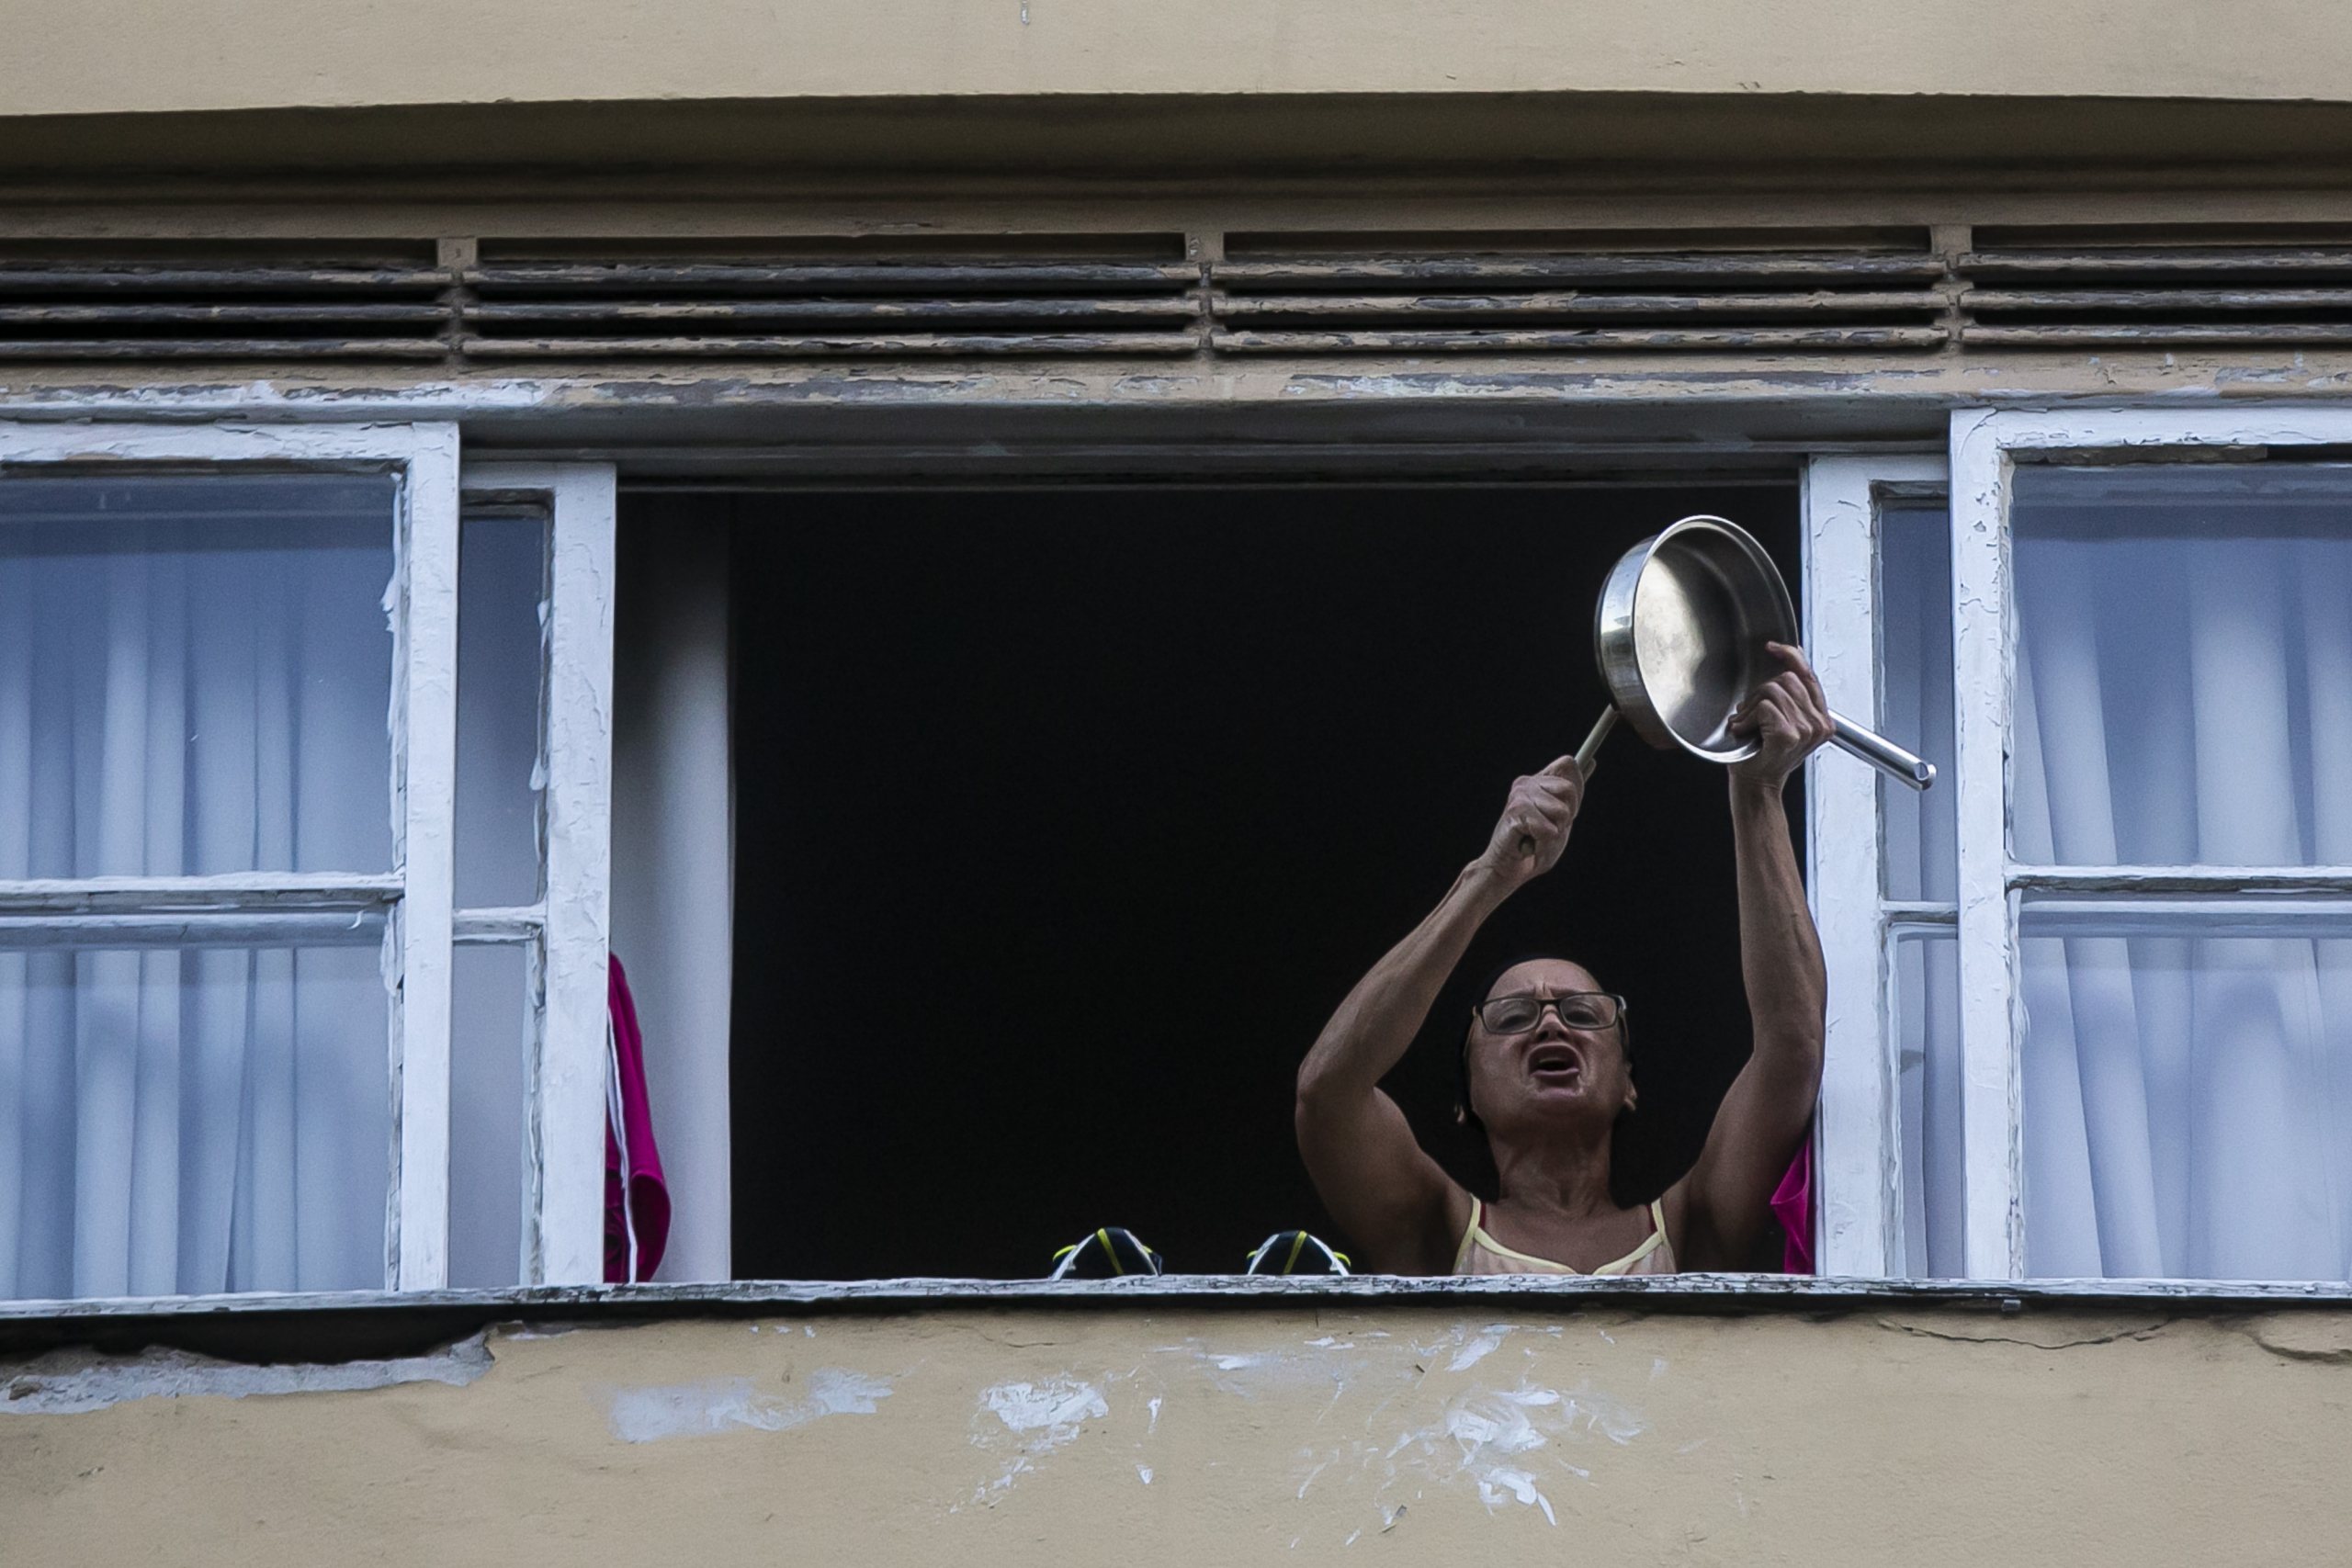 Pots and Pans Protest (Panelaco) Against Brazil President Jair Bolsonaro During his Press Conference Due to Resignation of Ministry of Justice Sergio Moro